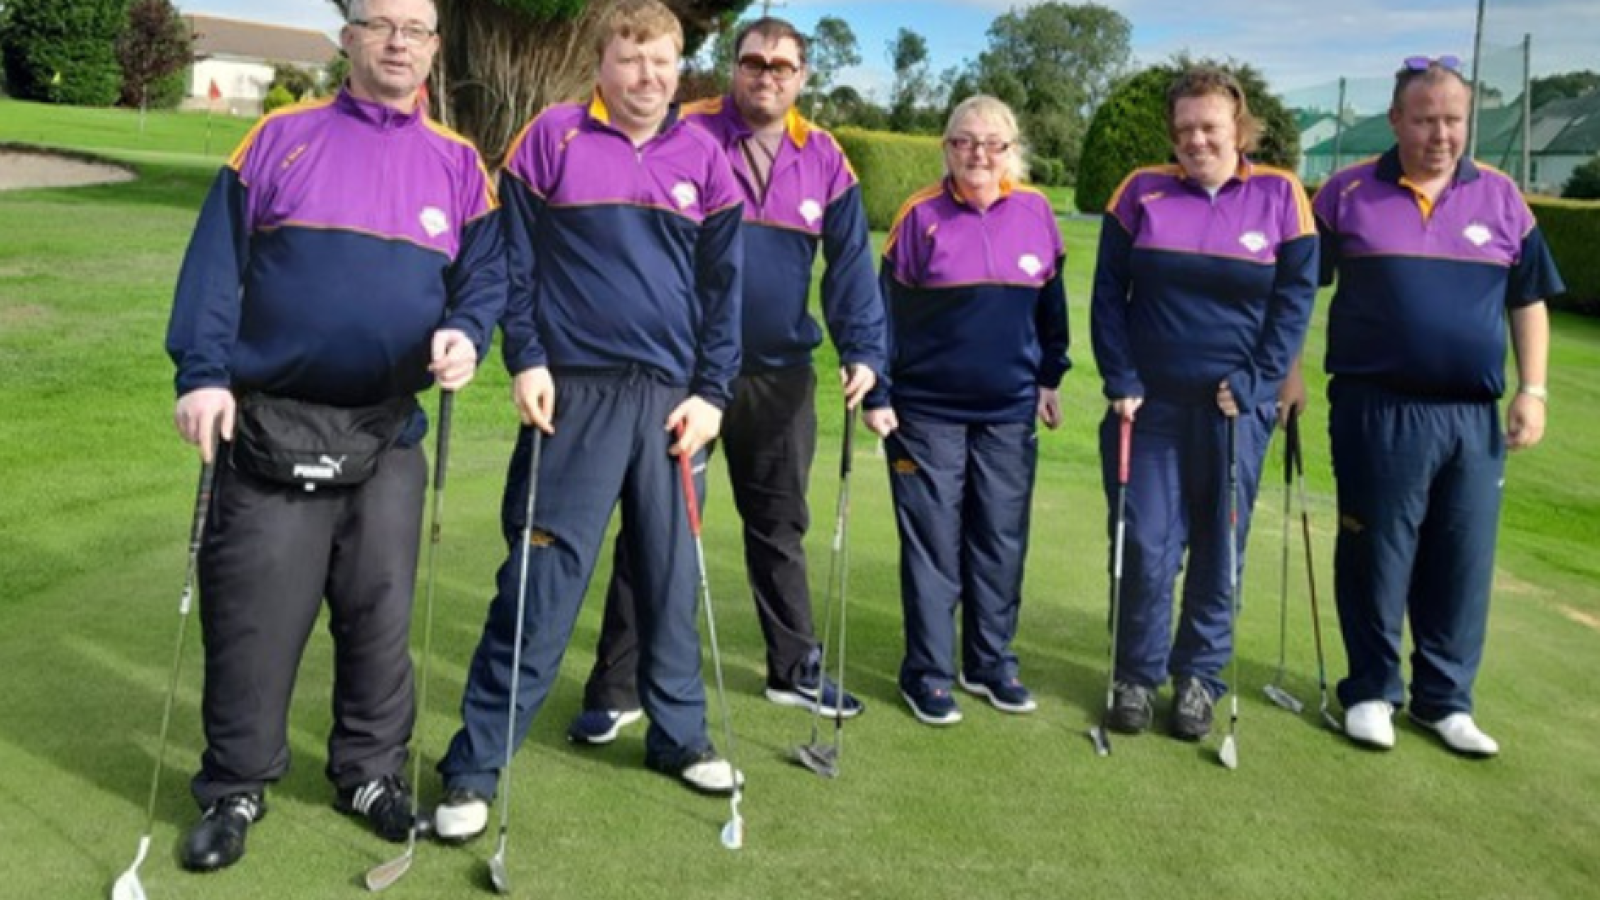 Group of athletes stand on golf course posing for photograph